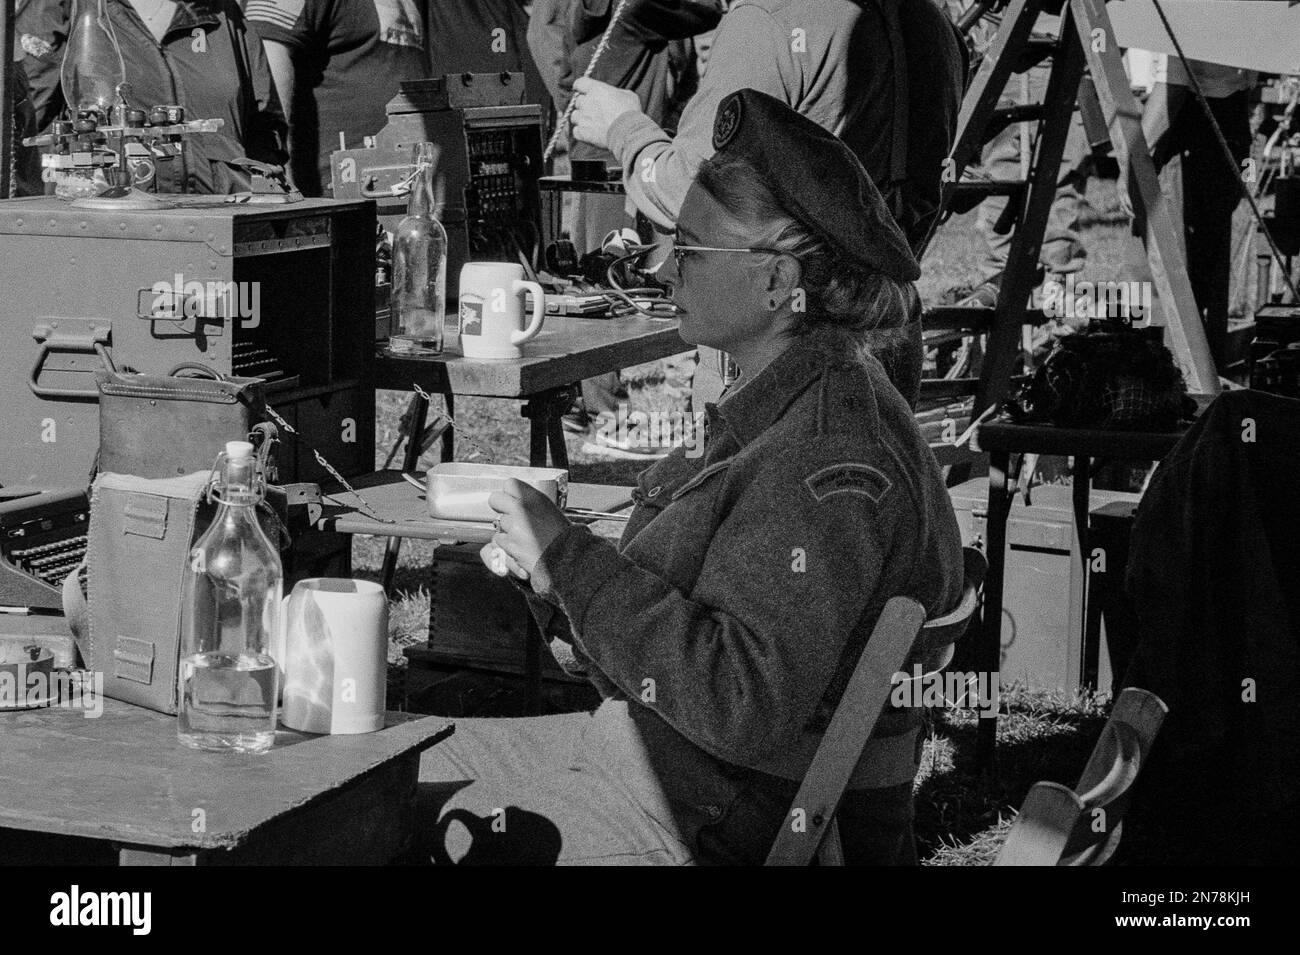 A WWII female reenactor sits a secretary desk under a tent at the American Heritage Museum. The image was captured on analog black and white film. Hud Stock Photo